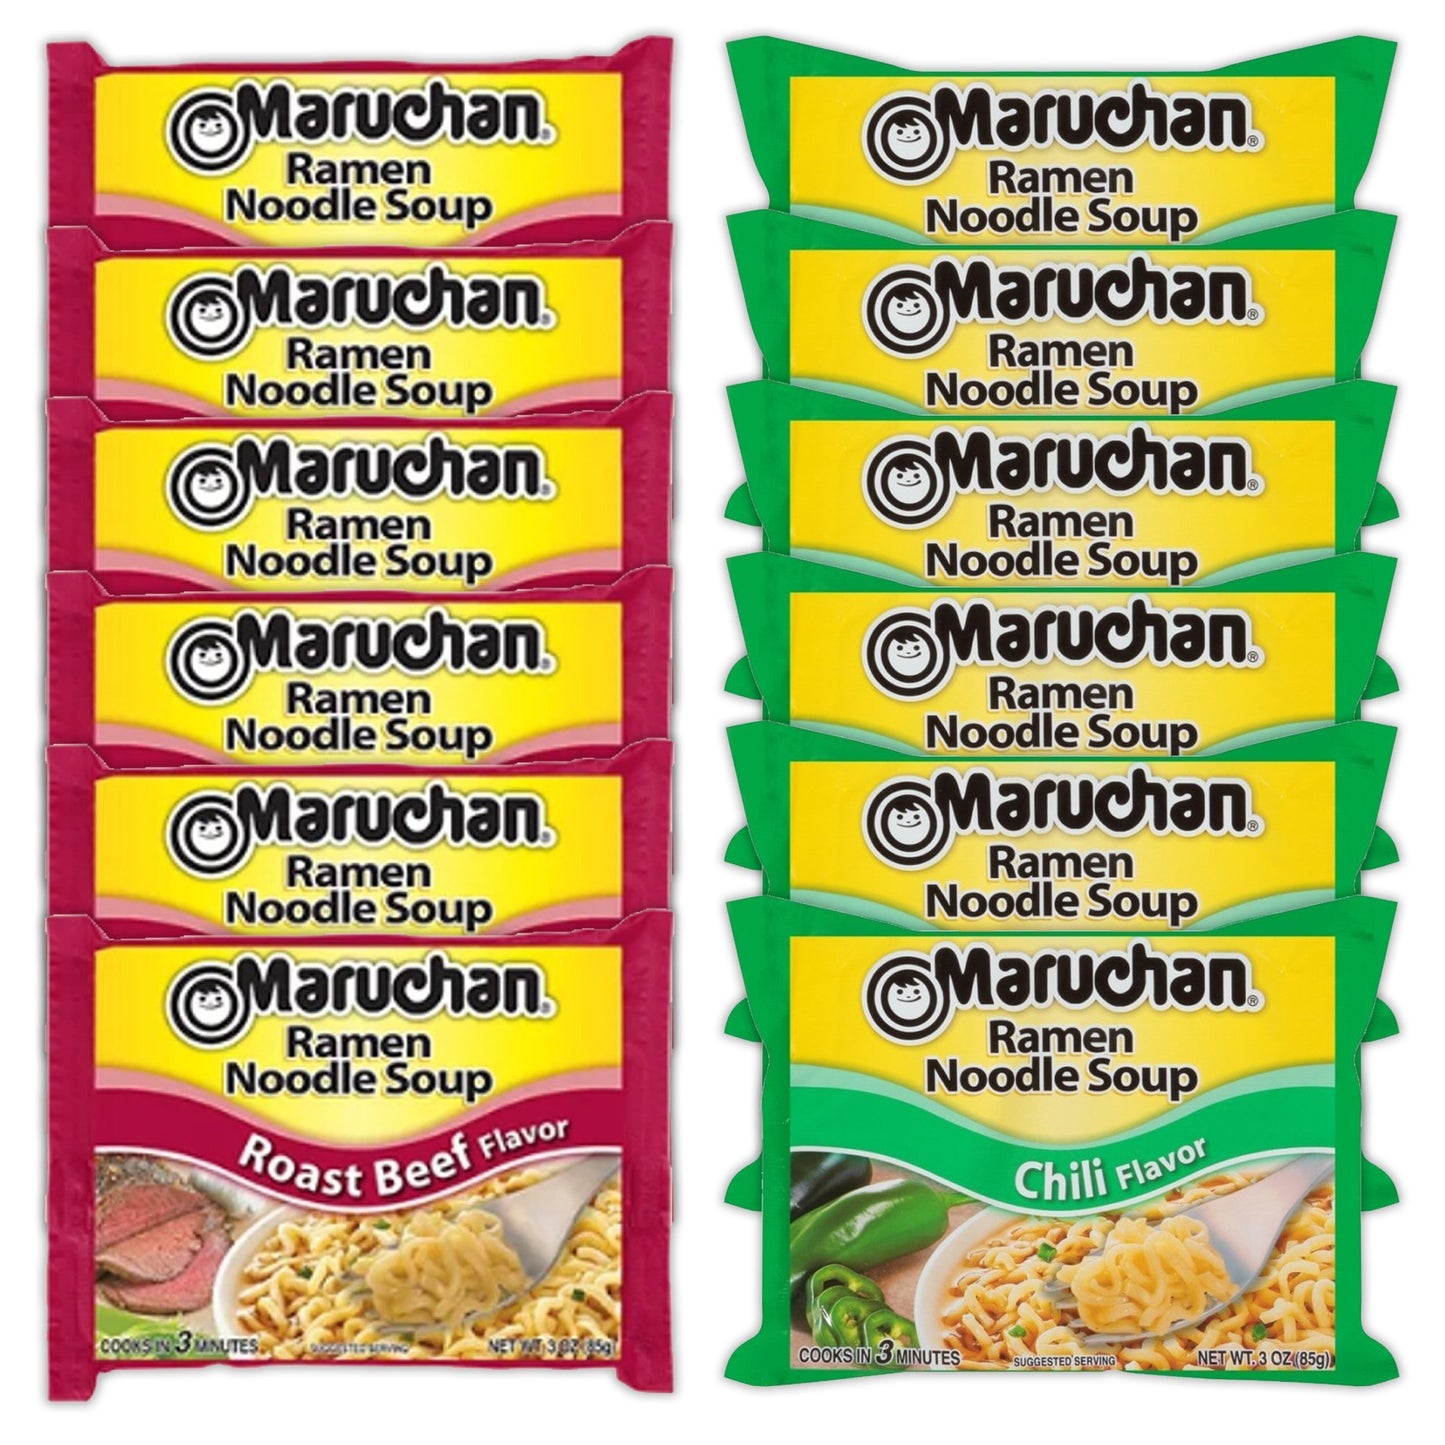 Maruchan Ramen Instant Noodle Soup Variety, 2 Flavors - 6 Packs Roast Beef & 6 Packs Chili , 3 Ounce Single Servings Lunch / Dinner Variety